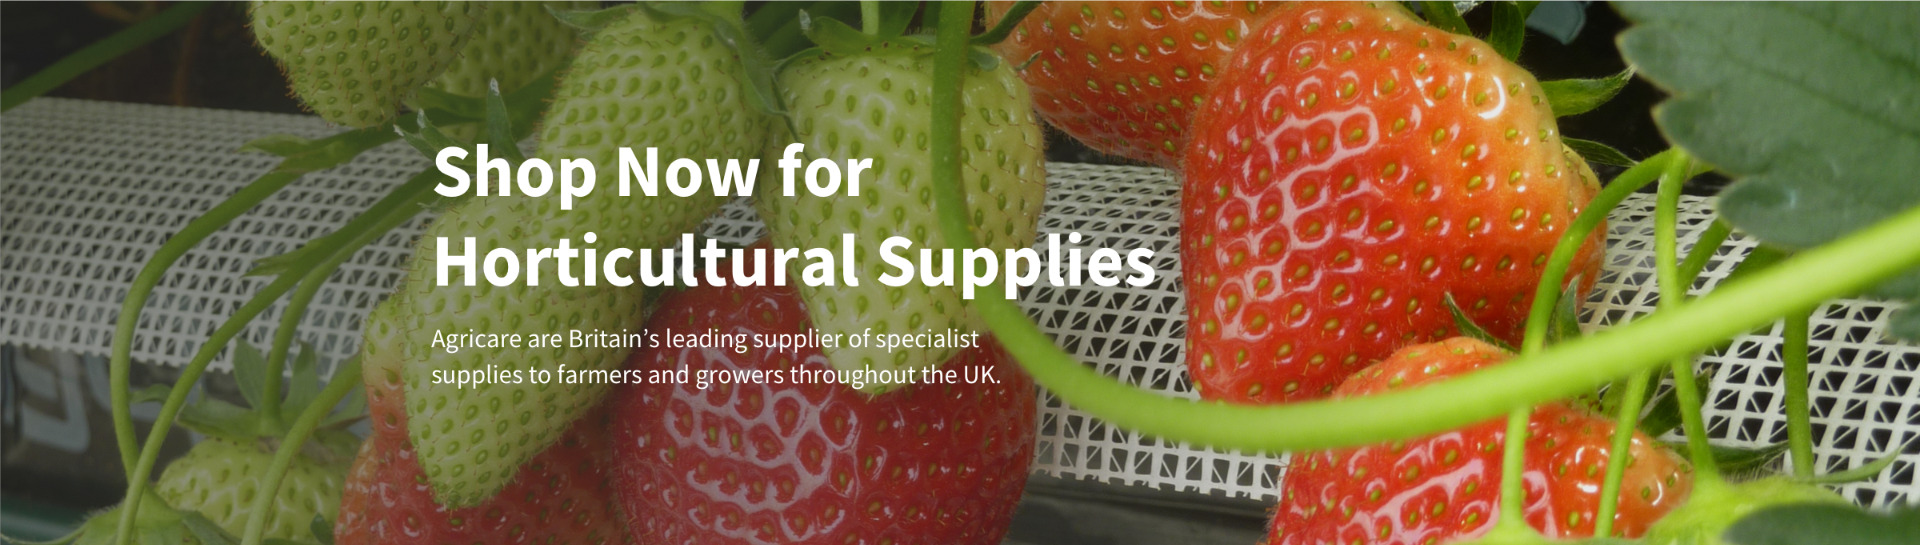 Shopw now for Horticultural Supplies. Agricare are Britain's leading supplier of specialist supplies to farmers and growers throughout the UK